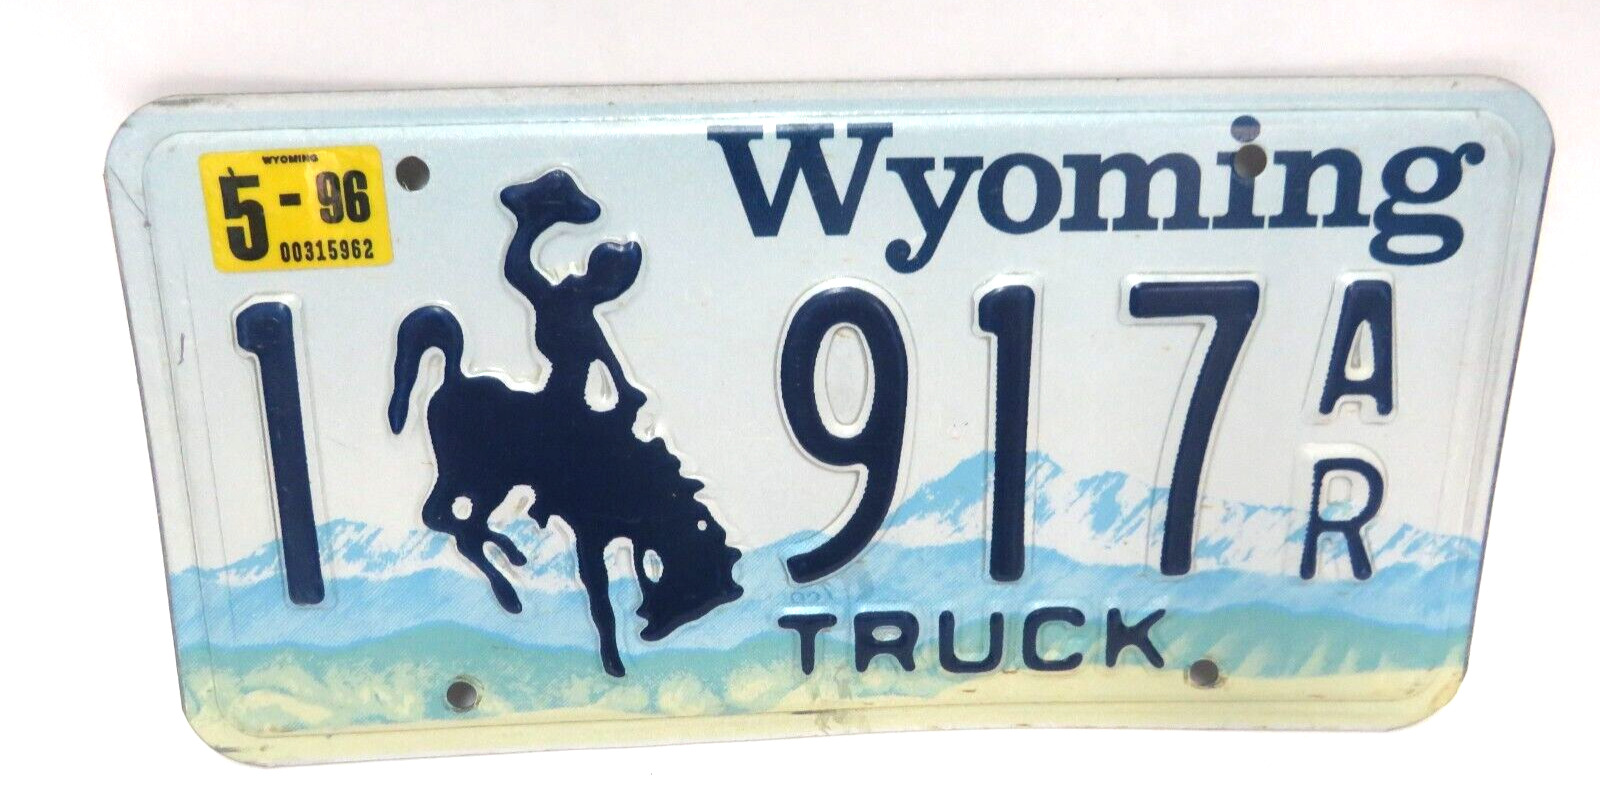 Wyoming Truck License Plate Natrona County #917 AR With Yellow 5-96 Tab